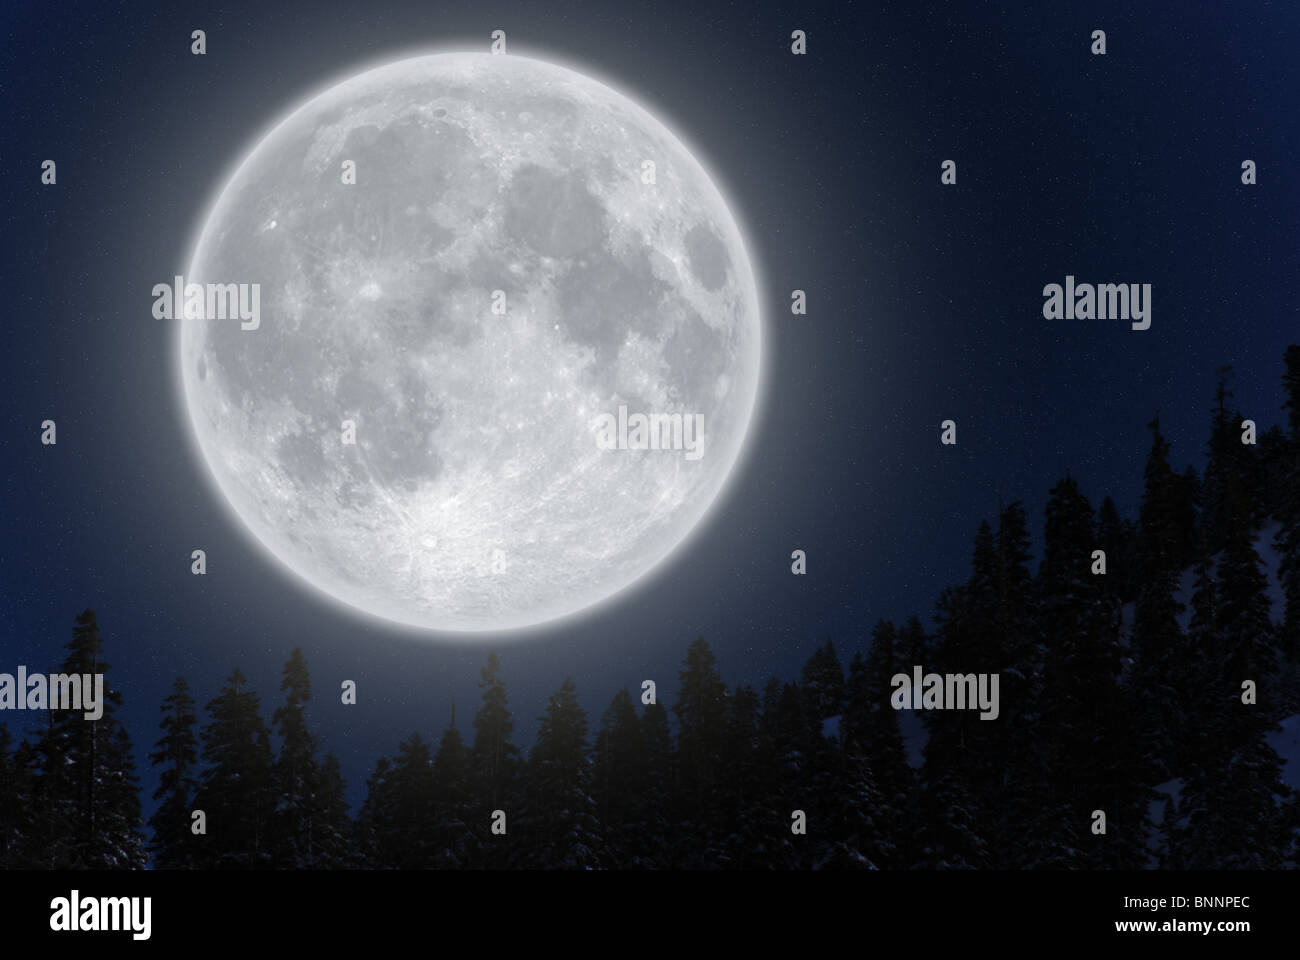 Full moon rising above conifer trees against clear sky. Stock Photo